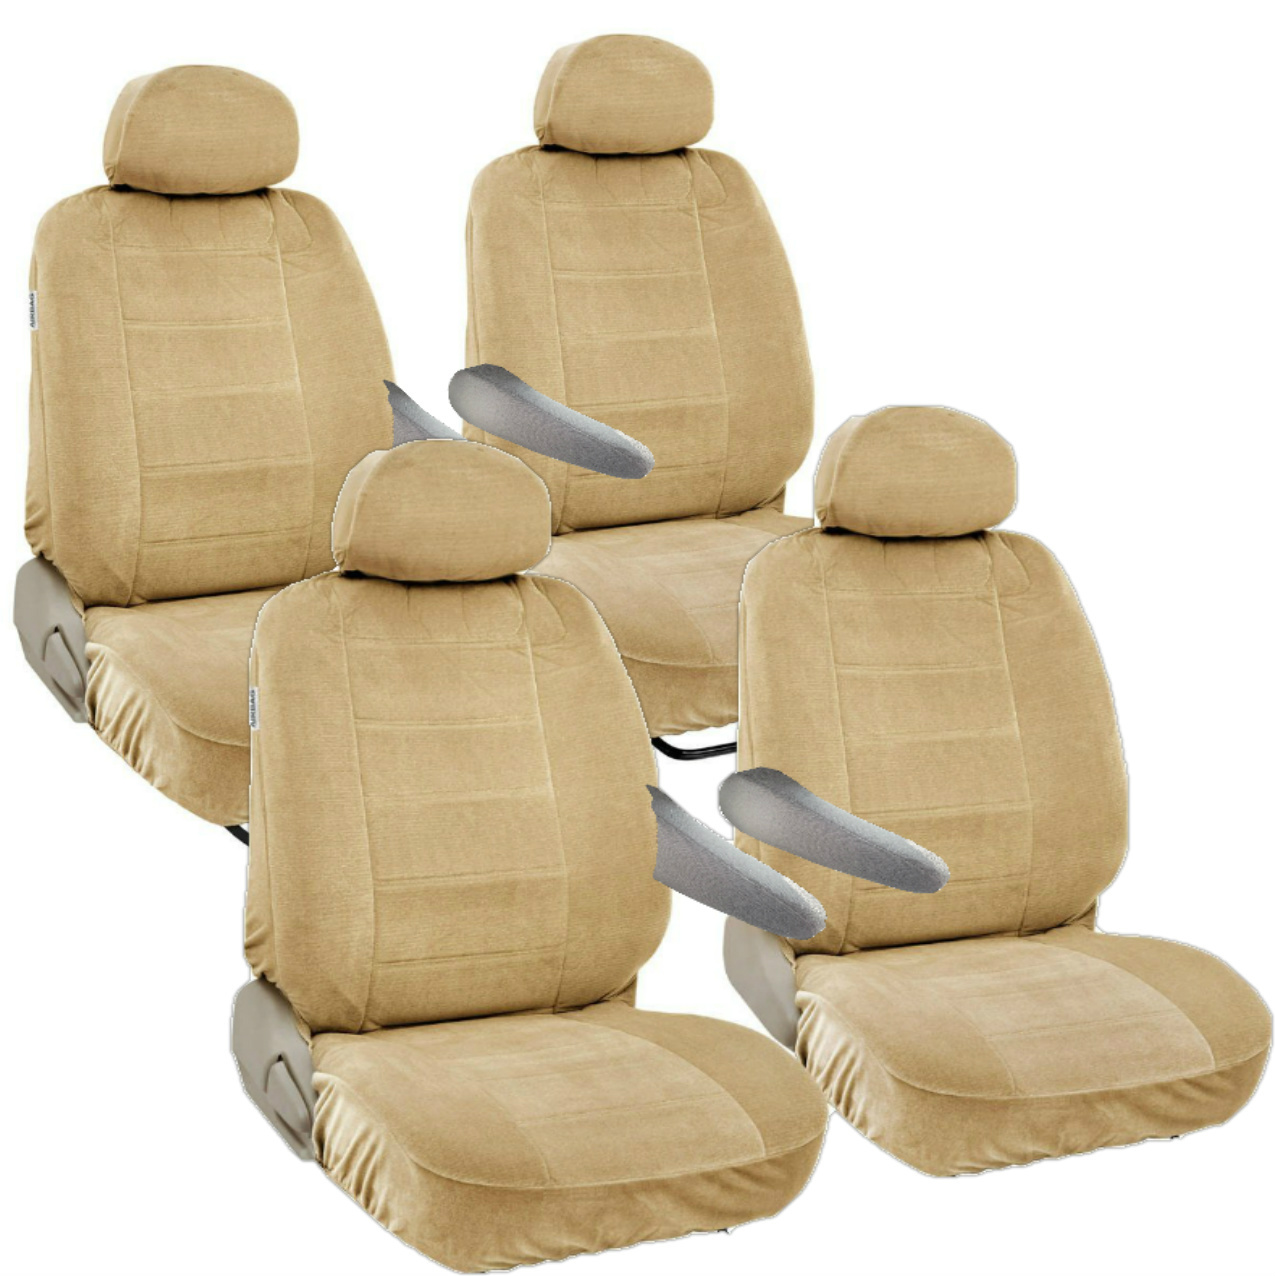 Van Seat Cover Front & Middle Row Bucket Seats Armrest Access 2000 - 2003 Toyota Sienna Semi Fit Thick Covers (Beige) - image 1 of 3